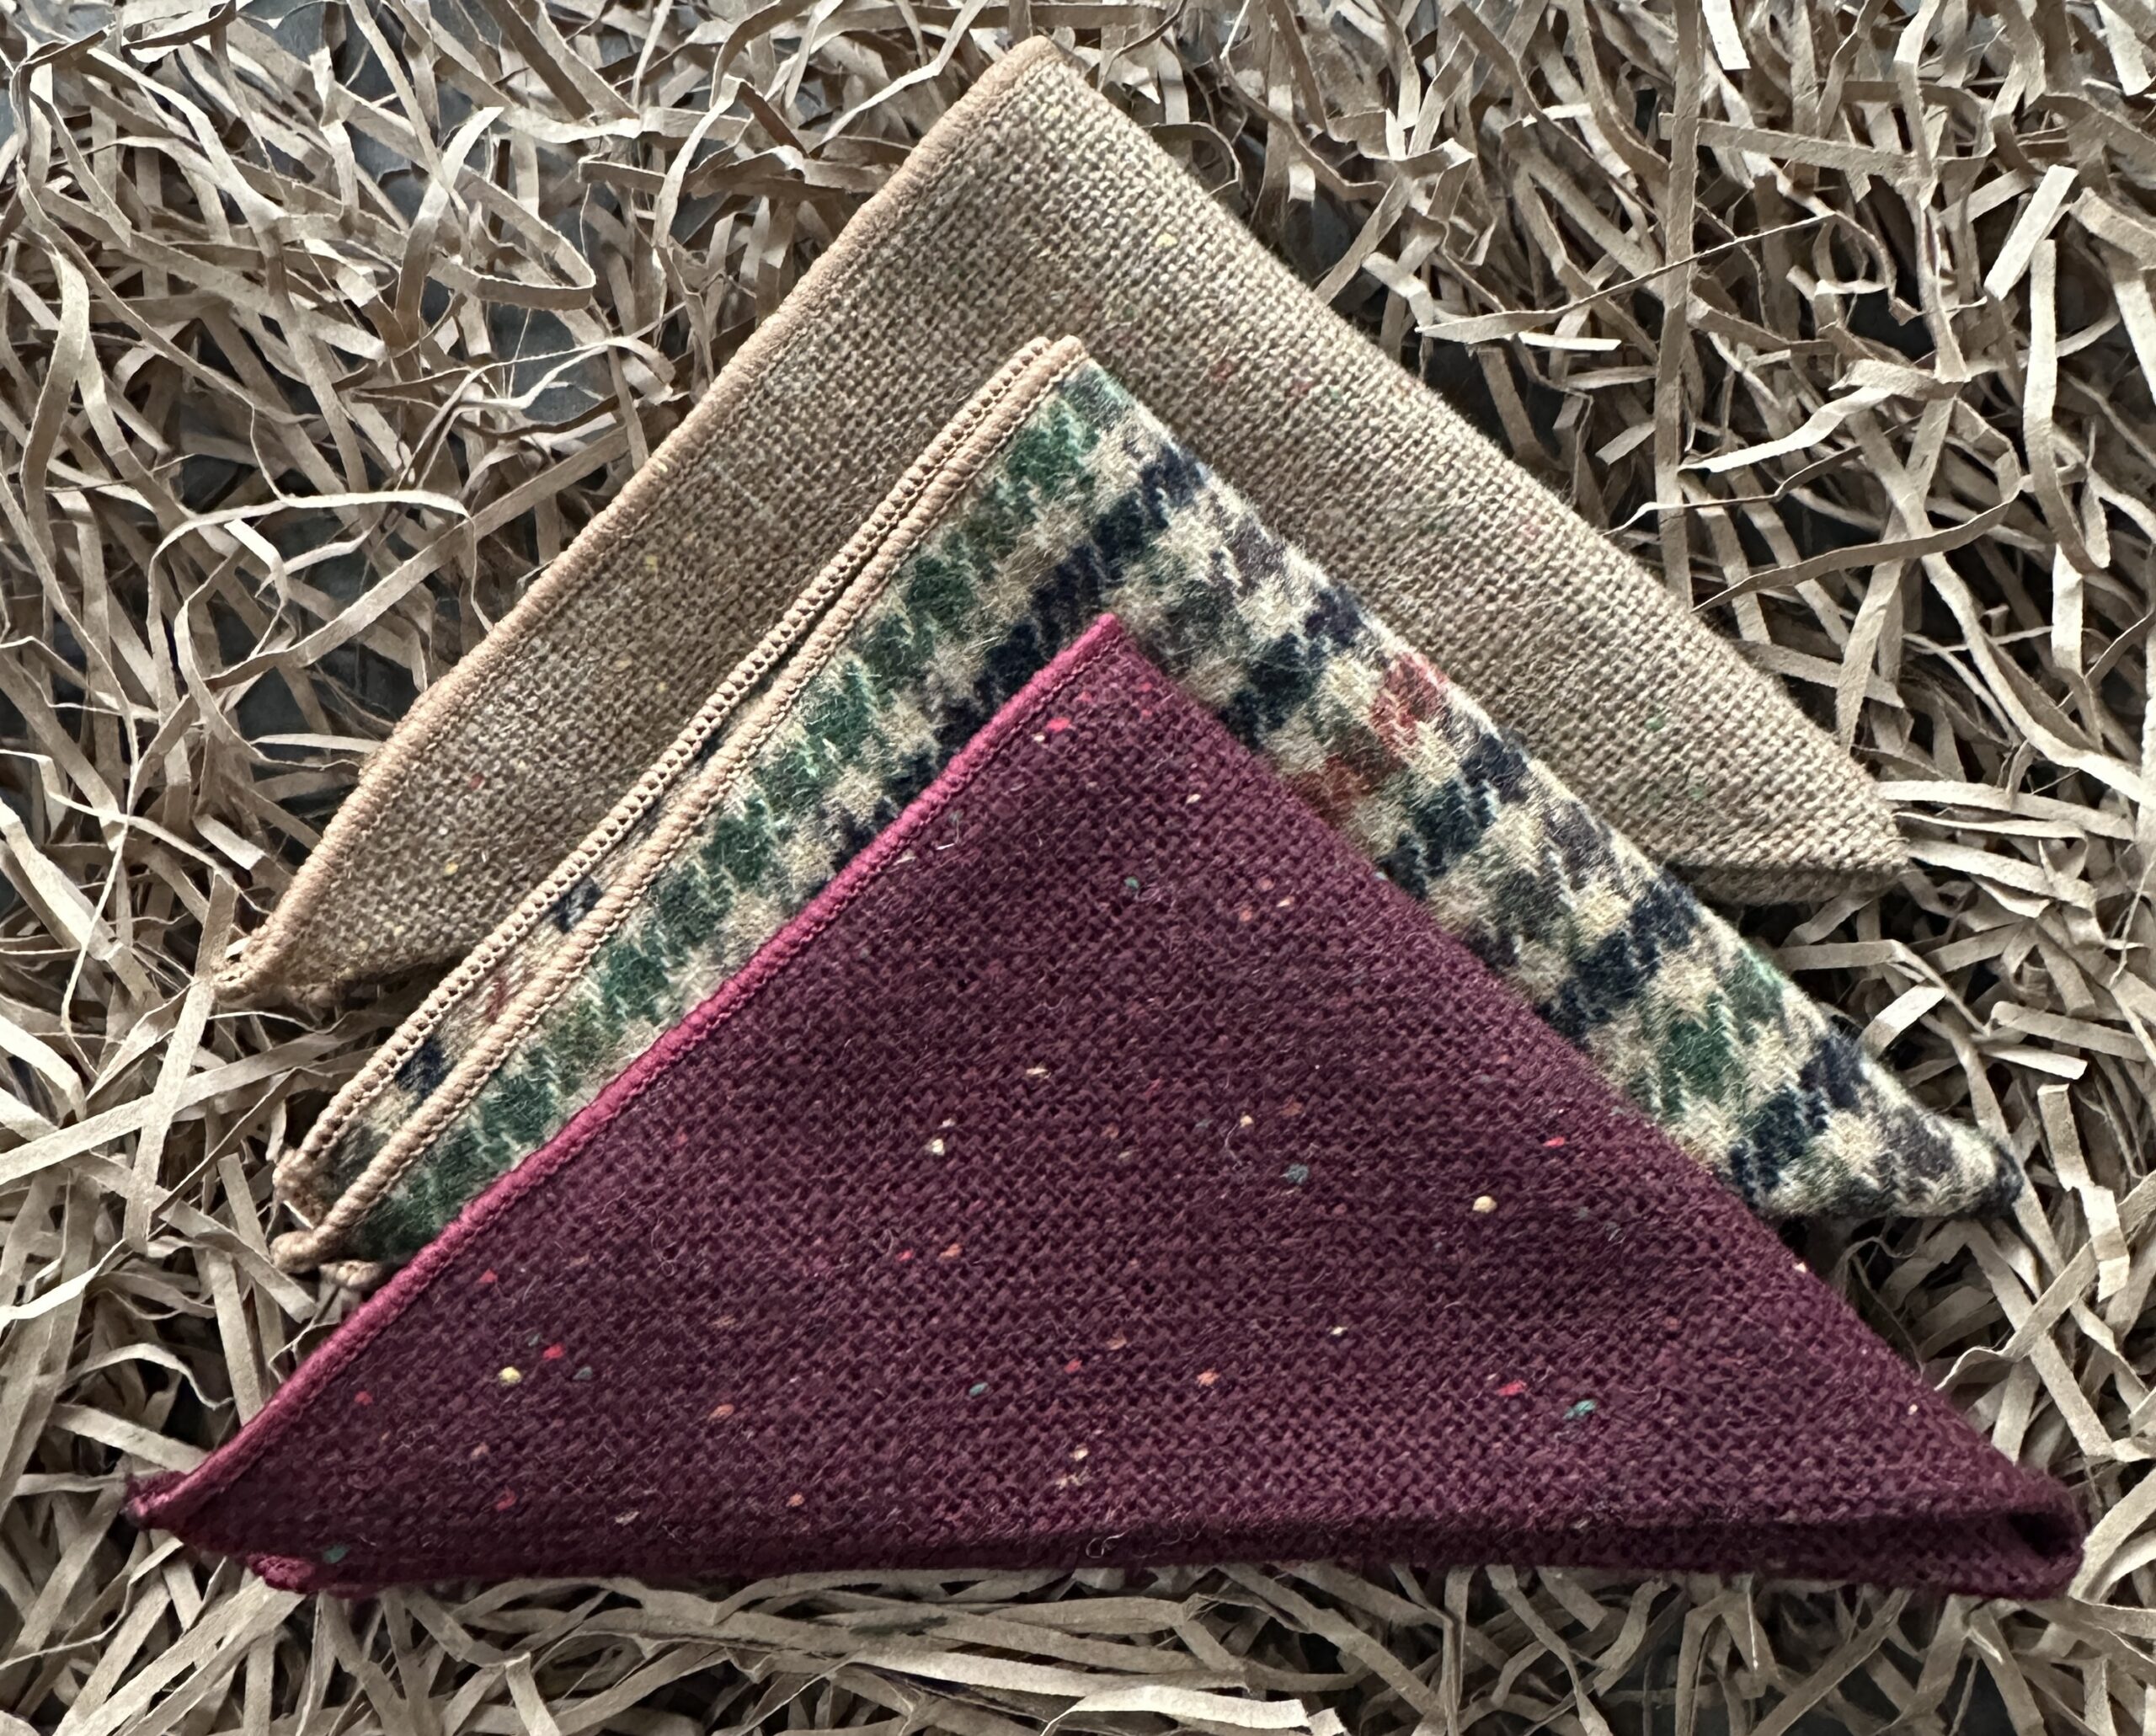 A set of three wool pocket squares for unique groomsmen gifts, best man gifts and gifts for men UK. The set is made of wool and comes in beige, check and red shades.